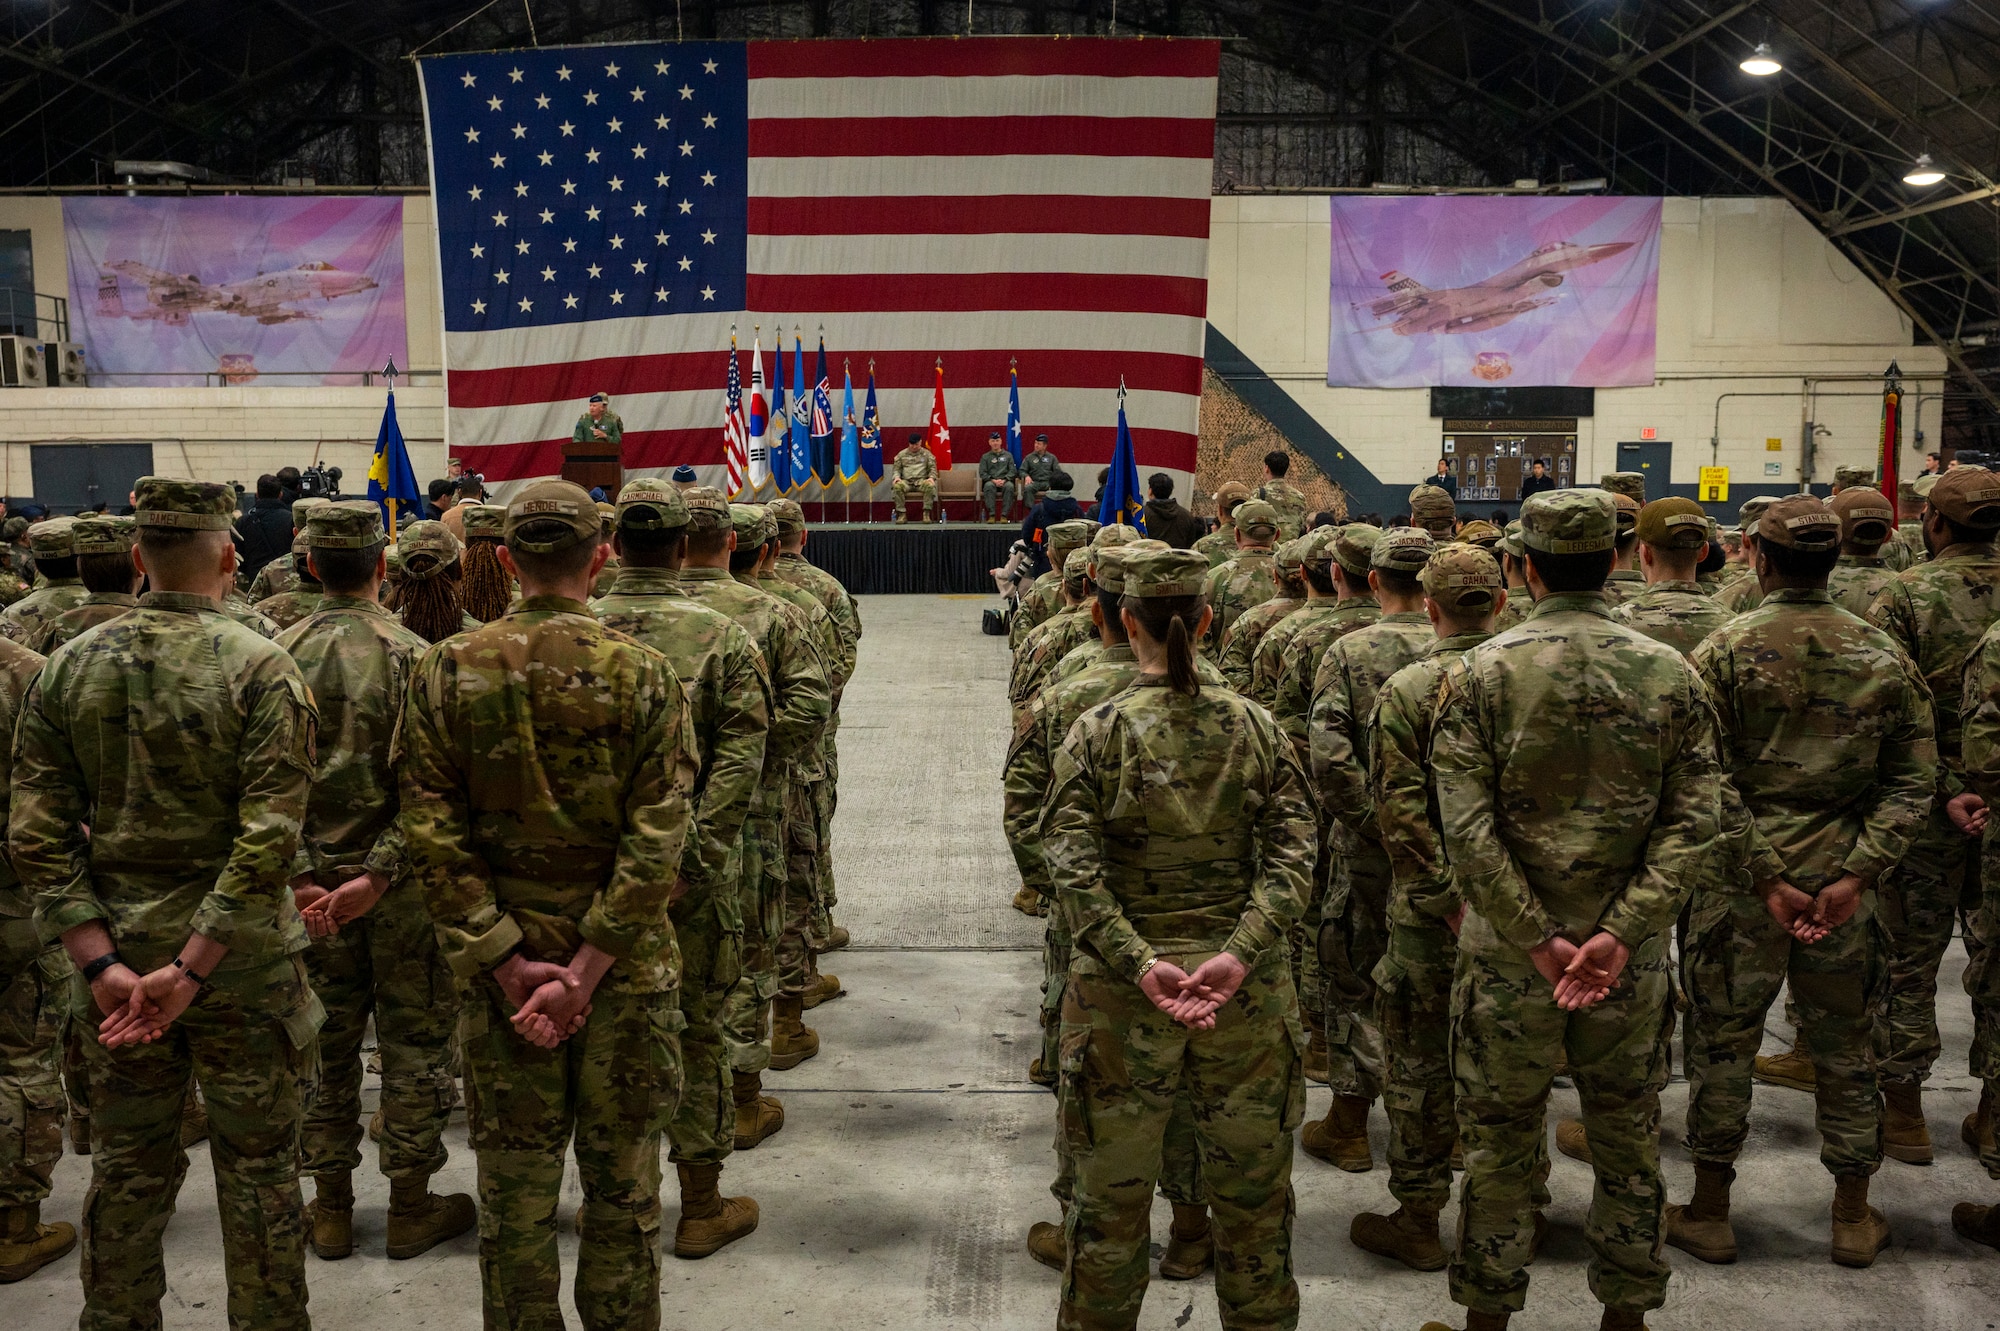 Two formations of U.S. Air Force Airmen and U.S. Army Soldiers appear from the back, looking toward a stage with a large US flag backdrop during the Seventh Air Force change of command ceremony, at Osan Air Base.